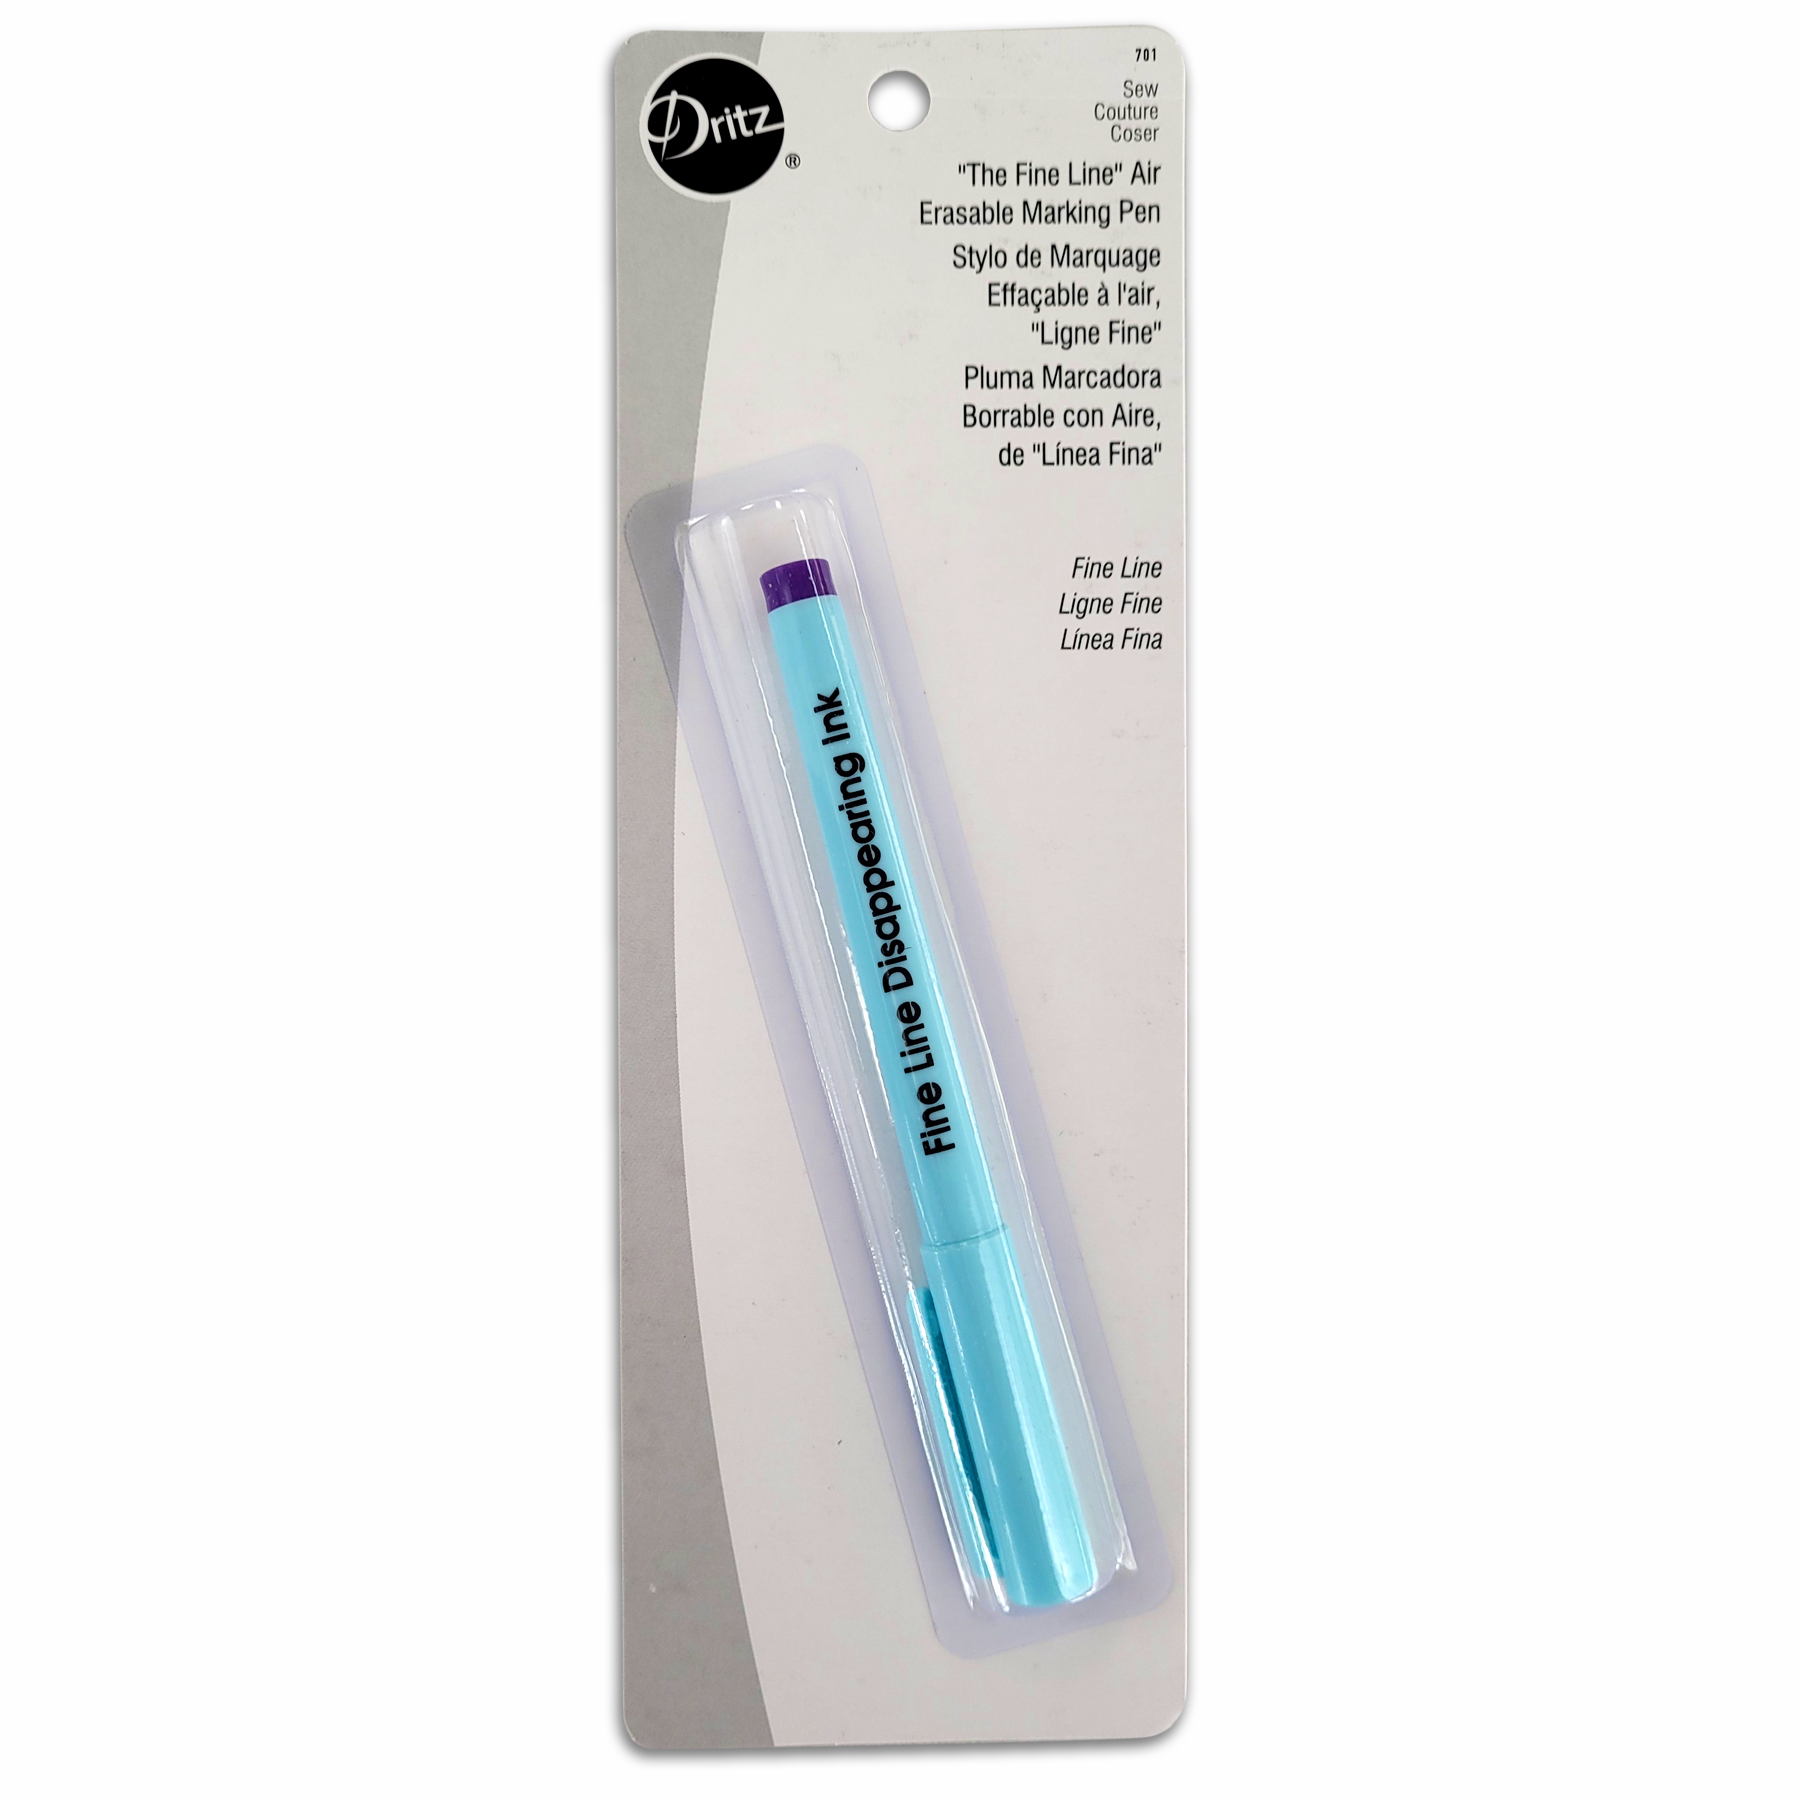 Disappearing Erasable Ink Fabric Marker Pen Vanishing for Sewing